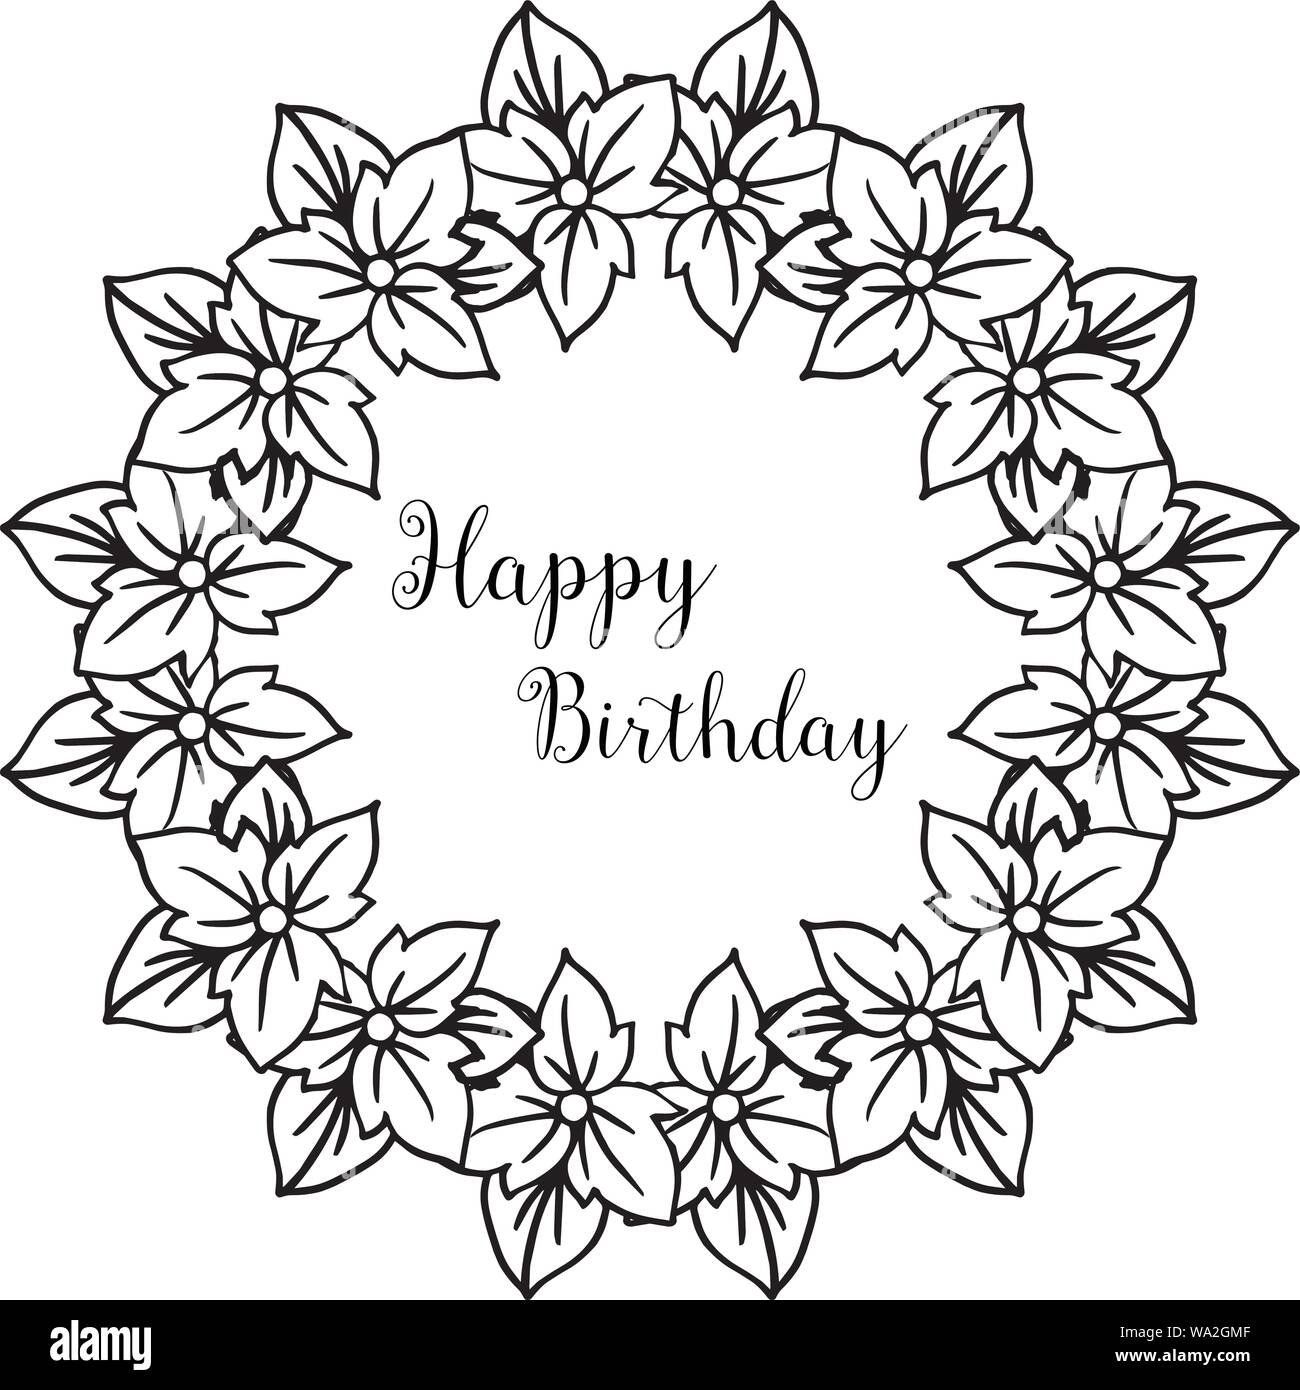 Hand drawing greeting lettering happy birthday design  wall stickers  message creative symbol  myloviewcom